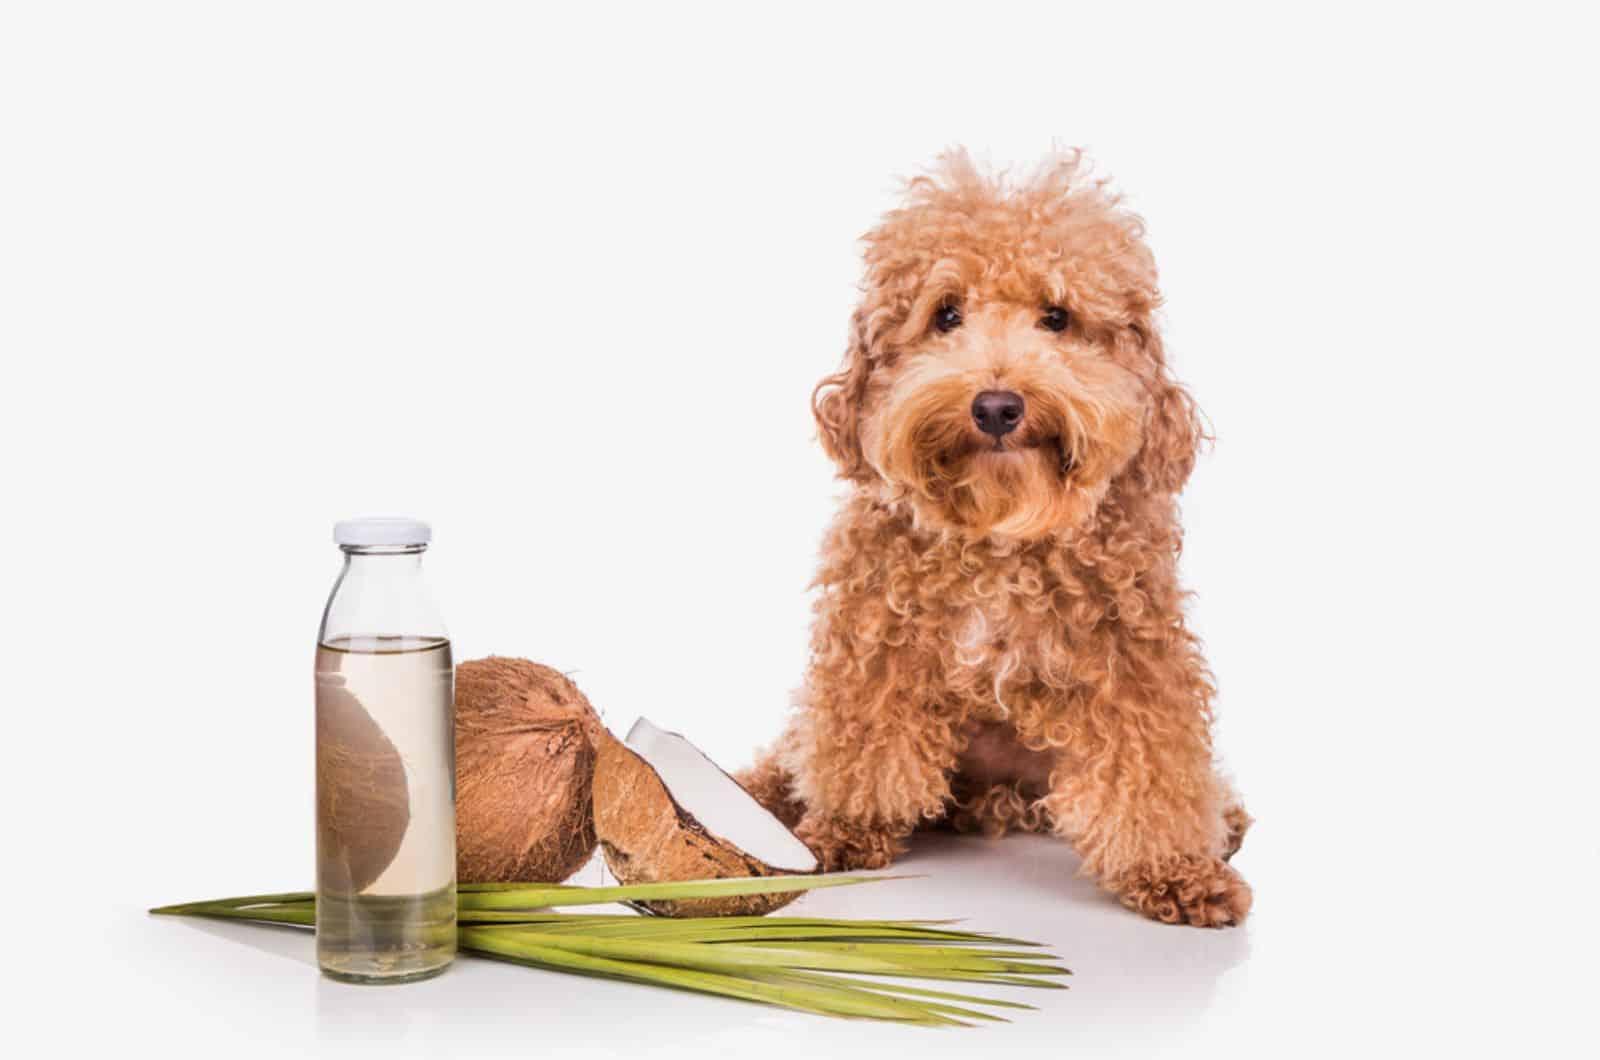 How Healthy Is Coconut Oil For My Dog?